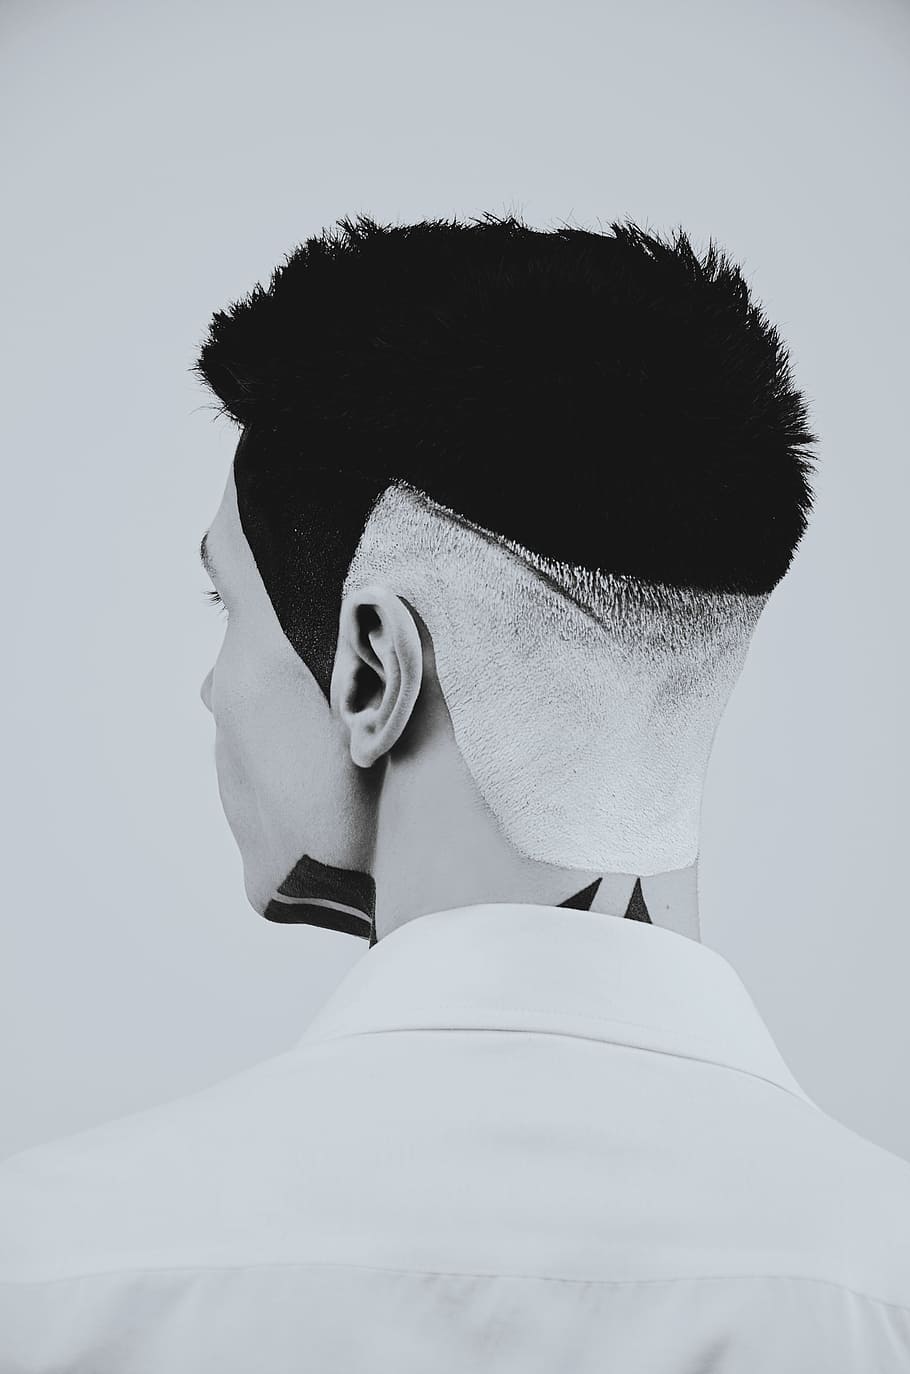 Hair Tattoo Designs :: 20 Cool Haircut Designs for Stylish Men and Boys -  AtoZ Hairstyles